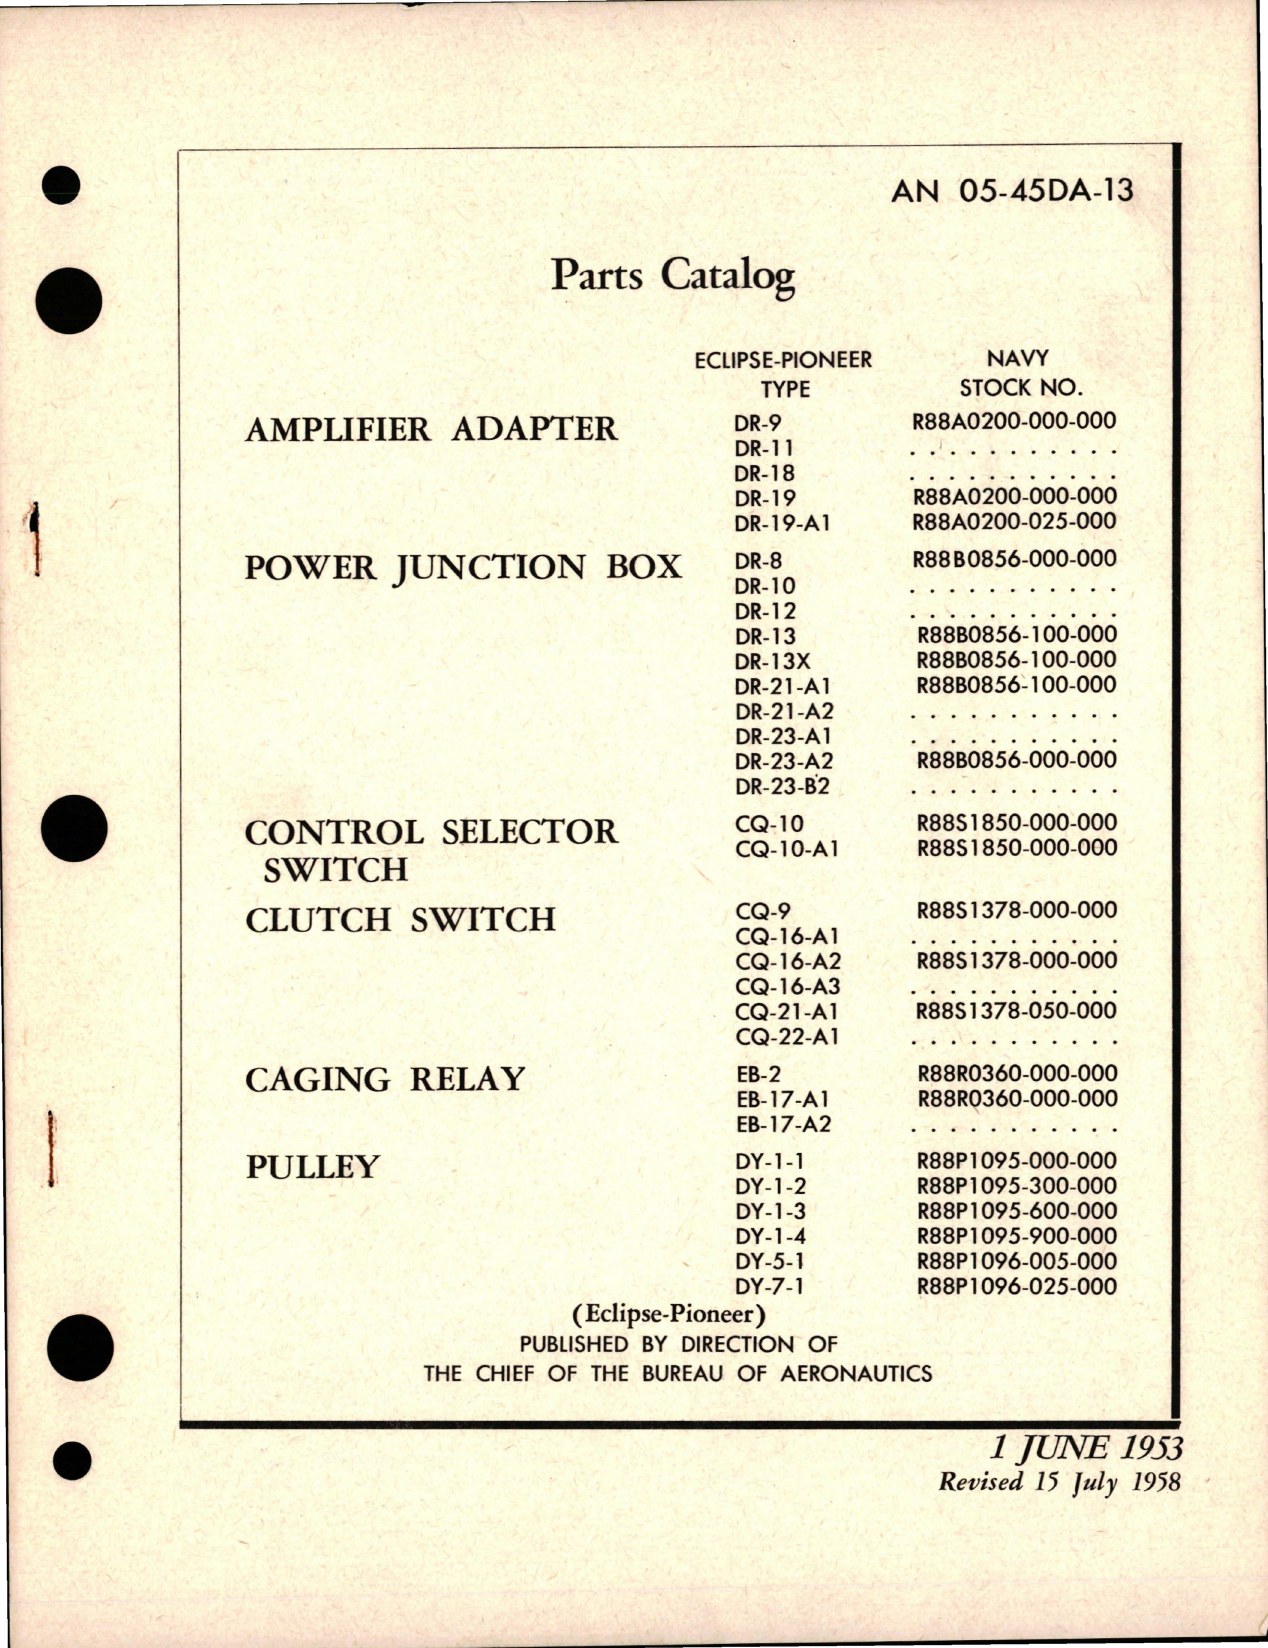 Sample page 1 from AirCorps Library document: Parts Catalog for Amplifier Adapter, Power Junction Box, Control Selector & Clutch Switch, Caging Relay and Pulley